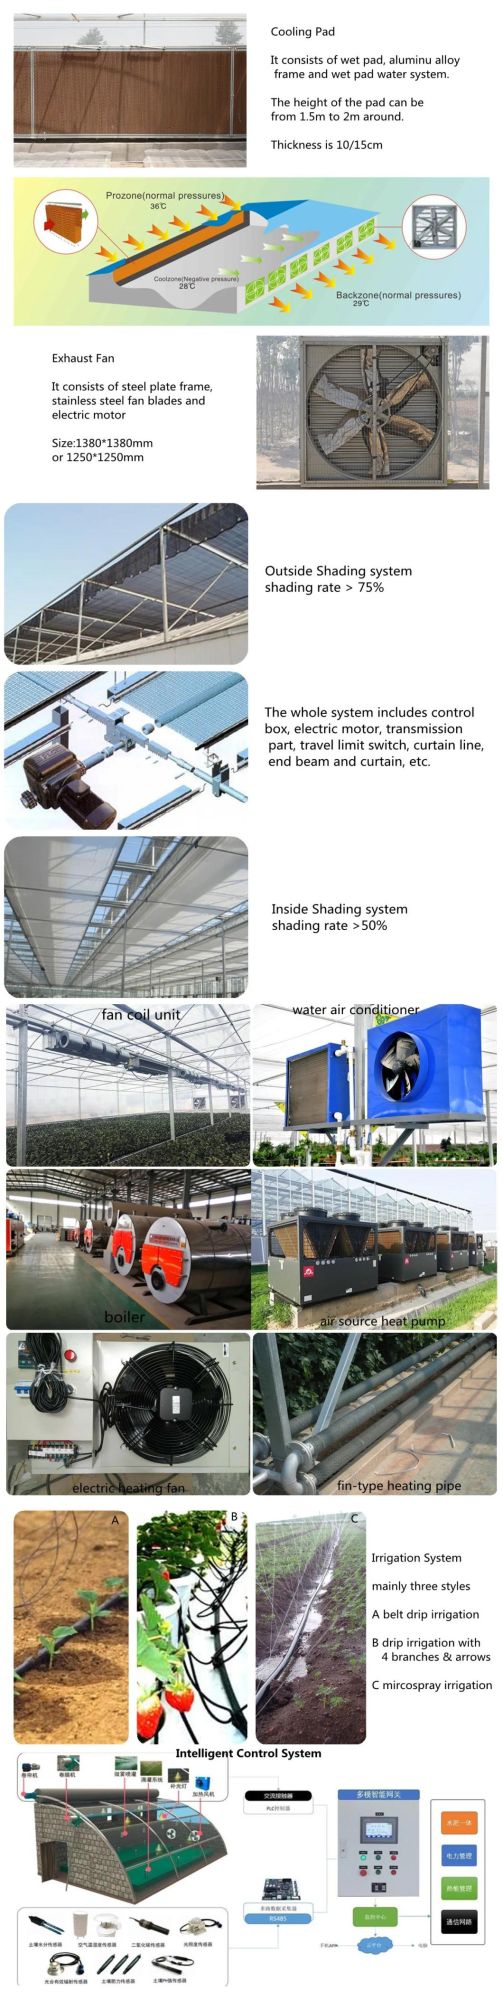 Good Quality Seedling Machine with Watering Station and Air Compressor for Seedling Tray Seeds Sowing for Green House Farming